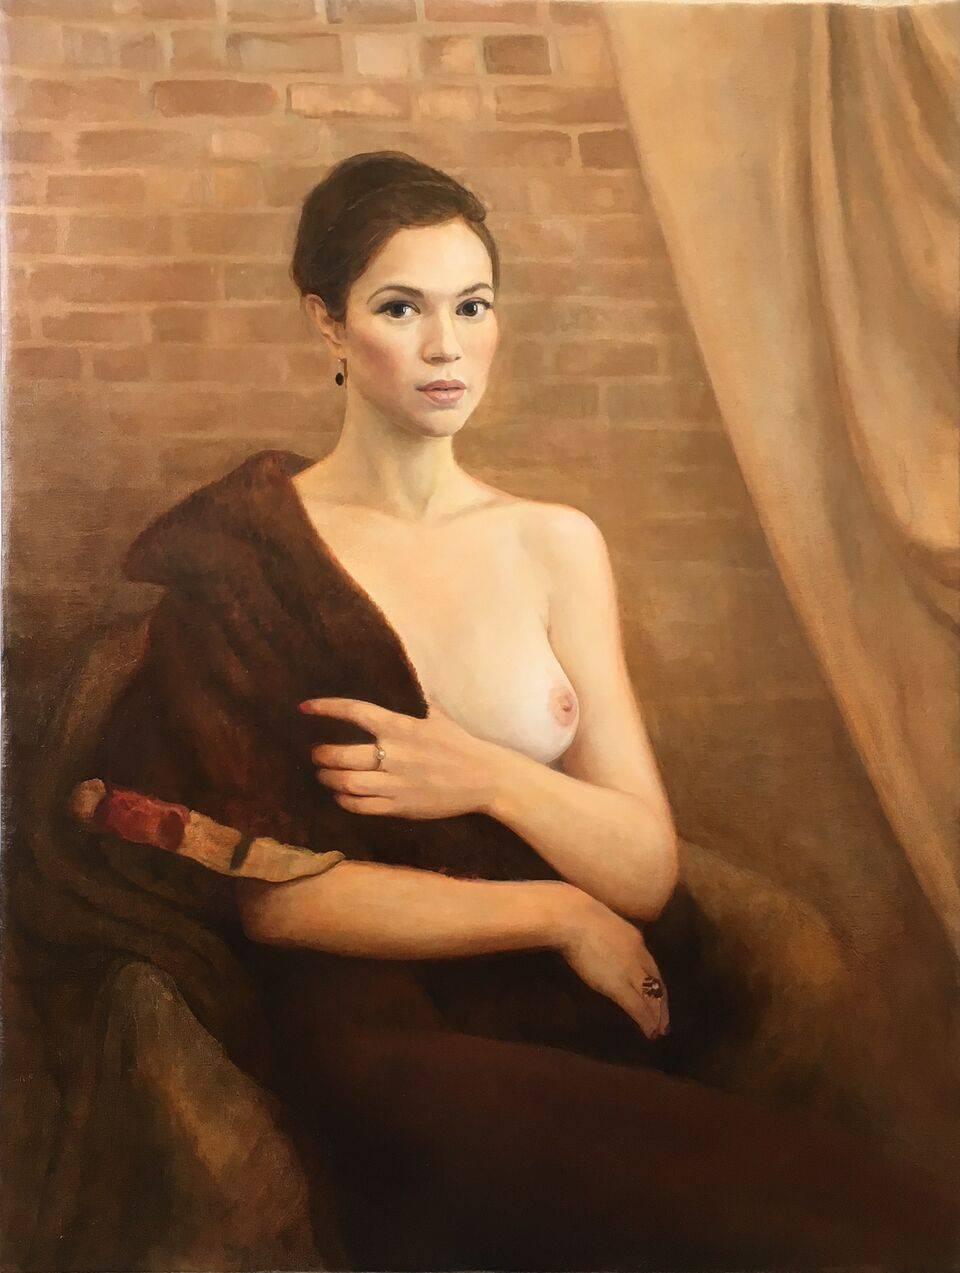 David Molesky Figurative Painting - Lady in a Fur - Scout / oil on linen